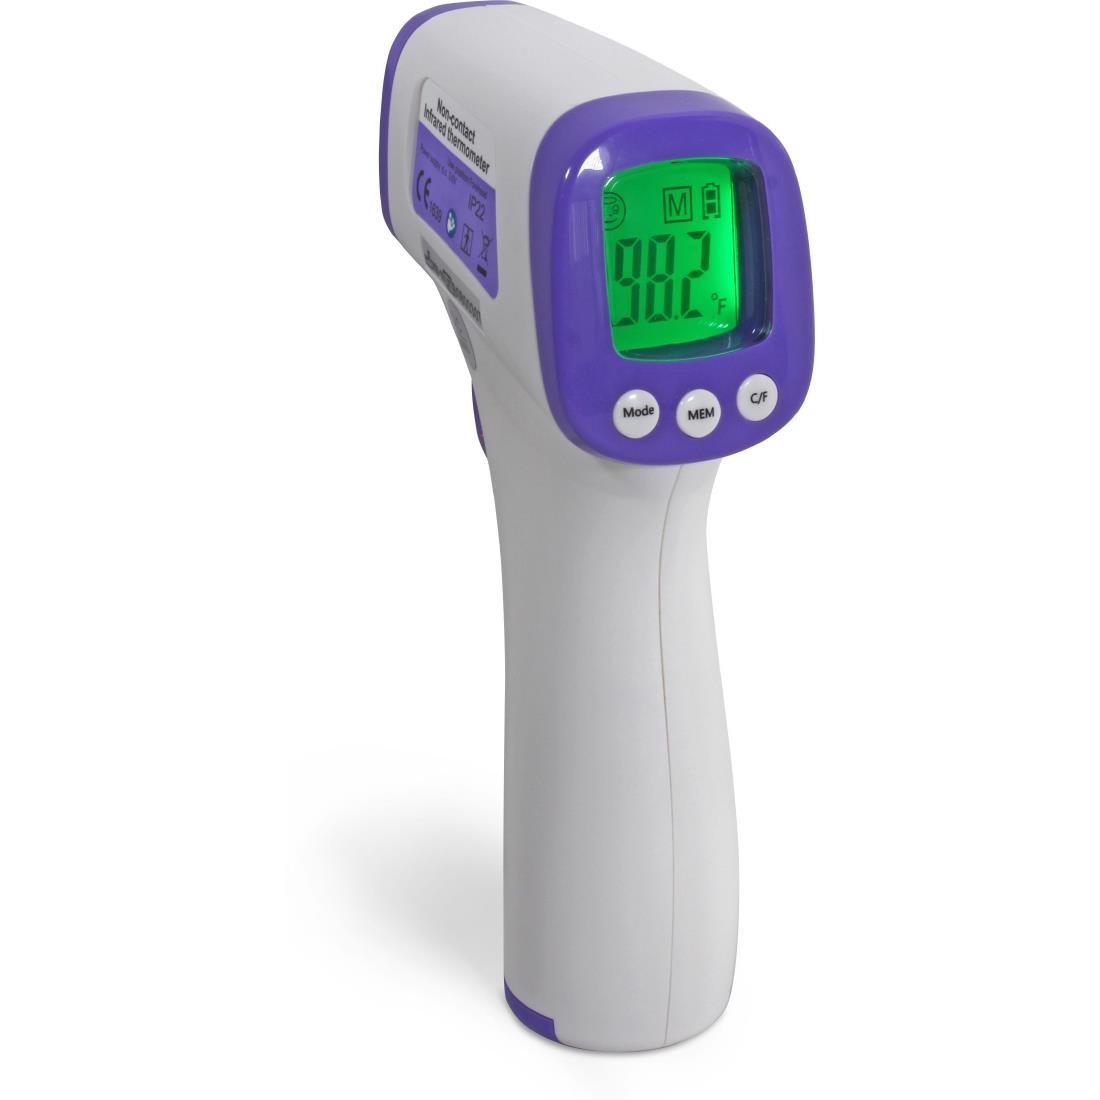 San Jamar Non-Contact Infrared Forehead Thermometer - DF030  - 1